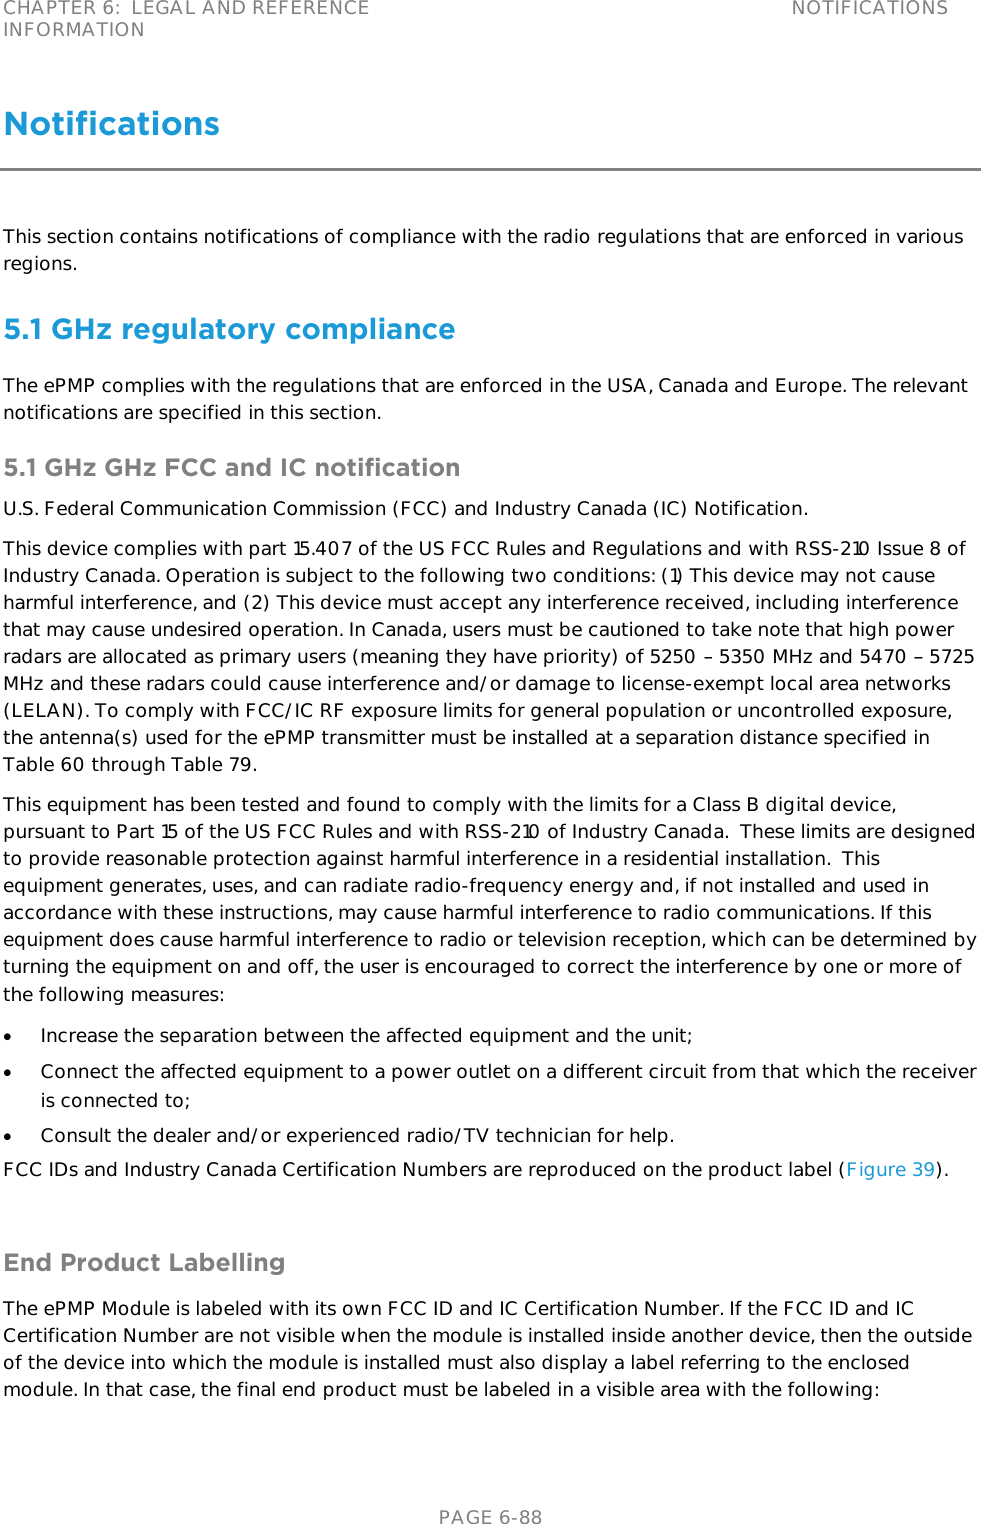 CHAPTER 6:  LEGAL AND REFERENCE INFORMATION NOTIFICATIONS   PAGE 6-88 Notifications This section contains notifications of compliance with the radio regulations that are enforced in various regions. 5.1 GHz regulatory compliance The ePMP complies with the regulations that are enforced in the USA, Canada and Europe. The relevant notifications are specified in this section. 5.1 GHz GHz FCC and IC notification U.S. Federal Communication Commission (FCC) and Industry Canada (IC) Notification. This device complies with part 15.407 of the US FCC Rules and Regulations and with RSS-210 Issue 8 of Industry Canada. Operation is subject to the following two conditions: (1) This device may not cause harmful interference, and (2) This device must accept any interference received, including interference that may cause undesired operation. In Canada, users must be cautioned to take note that high power radars are allocated as primary users (meaning they have priority) of 5250   5350 MHz and 5470   5725 MHz and these radars could cause interference and/or damage to license-exempt local area networks (LELAN). To comply with FCC/IC RF exposure limits for general population or uncontrolled exposure, the antenna(s) used for the ePMP transmitter must be installed at a separation distance specified in Table 60 through Table 79. This equipment has been tested and found to comply with the limits for a Class B digital device, pursuant to Part 15 of the US FCC Rules and with RSS-210 of Industry Canada.  These limits are designed to provide reasonable protection against harmful interference in a residential installation.  This equipment generates, uses, and can radiate radio-frequency energy and, if not installed and used in accordance with these instructions, may cause harmful interference to radio communications. If this equipment does cause harmful interference to radio or television reception, which can be determined by turning the equipment on and off, the user is encouraged to correct the interference by one or more of the following measures:  Increase the separation between the affected equipment and the unit;  Connect the affected equipment to a power outlet on a different circuit from that which the receiver is connected to;  Consult the dealer and/or experienced radio/TV technician for help. FCC IDs and Industry Canada Certification Numbers are reproduced on the product label (Figure 39).   End Product Labelling The ePMP Module is labeled with its own FCC ID and IC Certification Number. If the FCC ID and IC Certification Number are not visible when the module is installed inside another device, then the outside of the device into which the module is installed must also display a label referring to the enclosed module. In that case, the final end product must be labeled in a visible area with the following:  